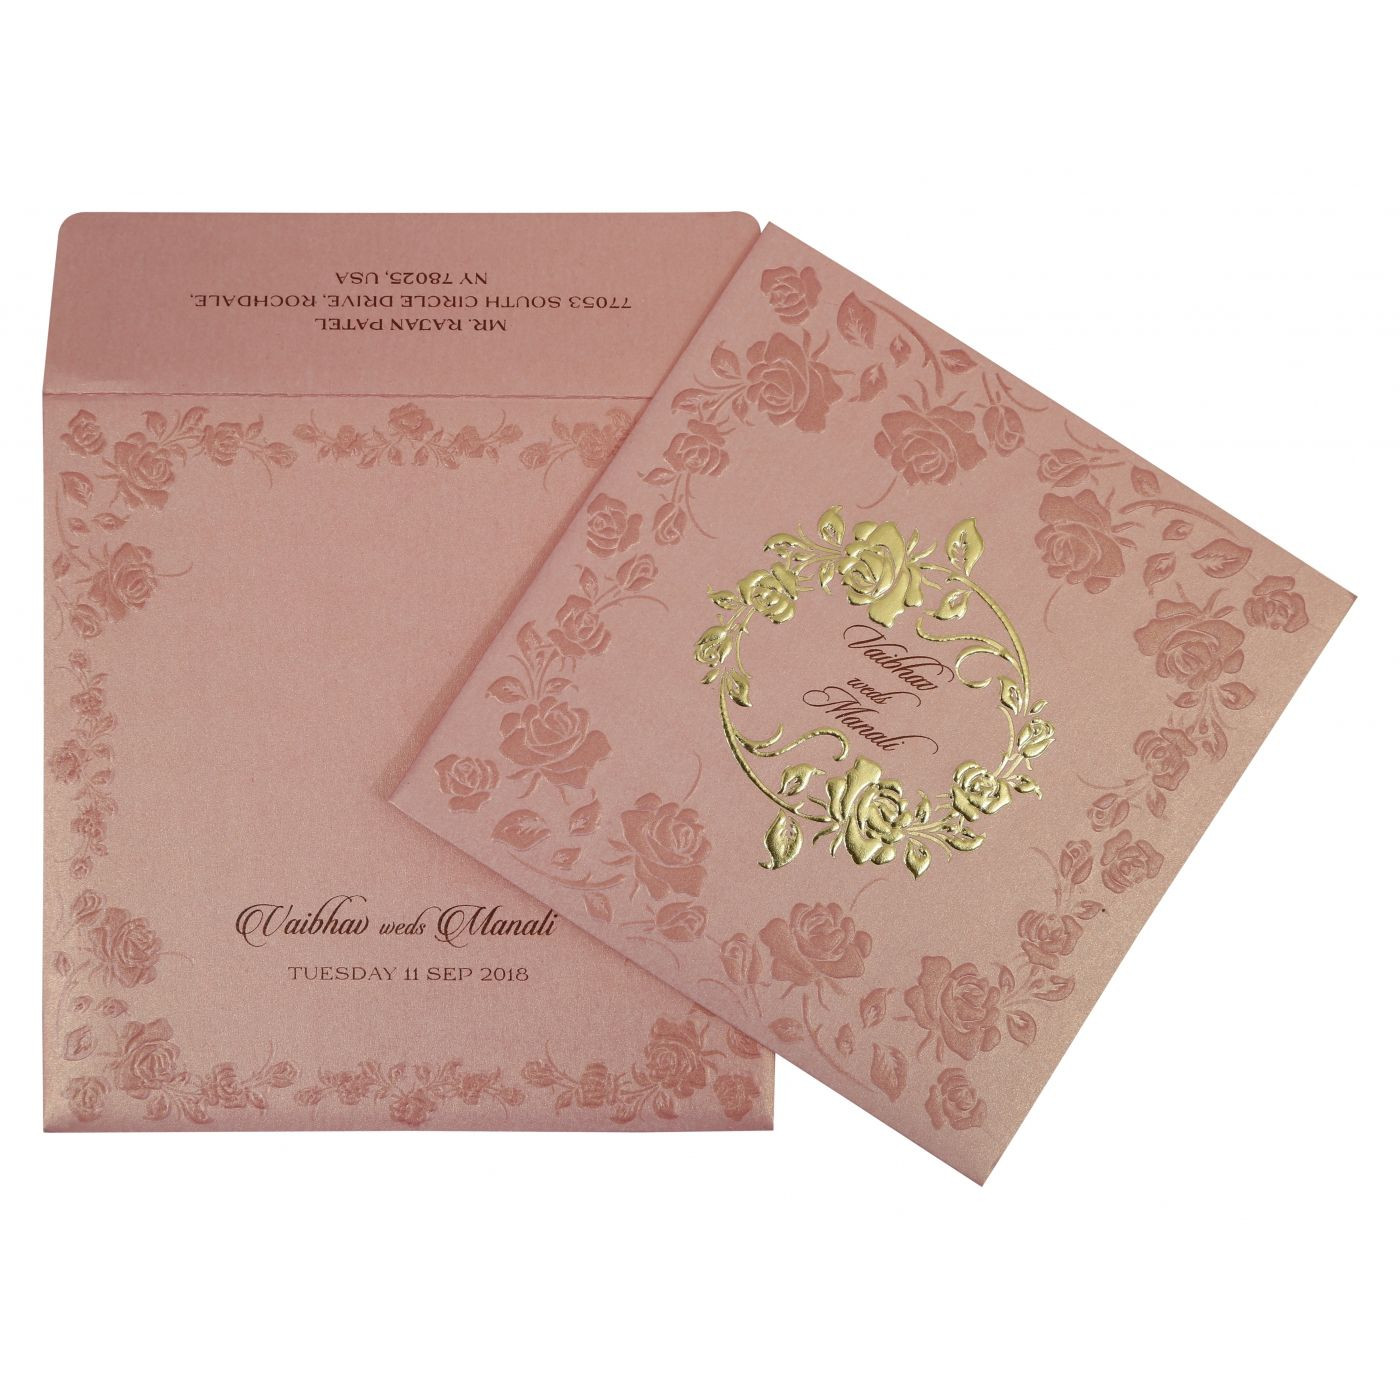 Foil Stamped Wedding Invitations
 BABY PINK SHIMMERY FLORAL THEMED FOIL STAMPED WEDDING